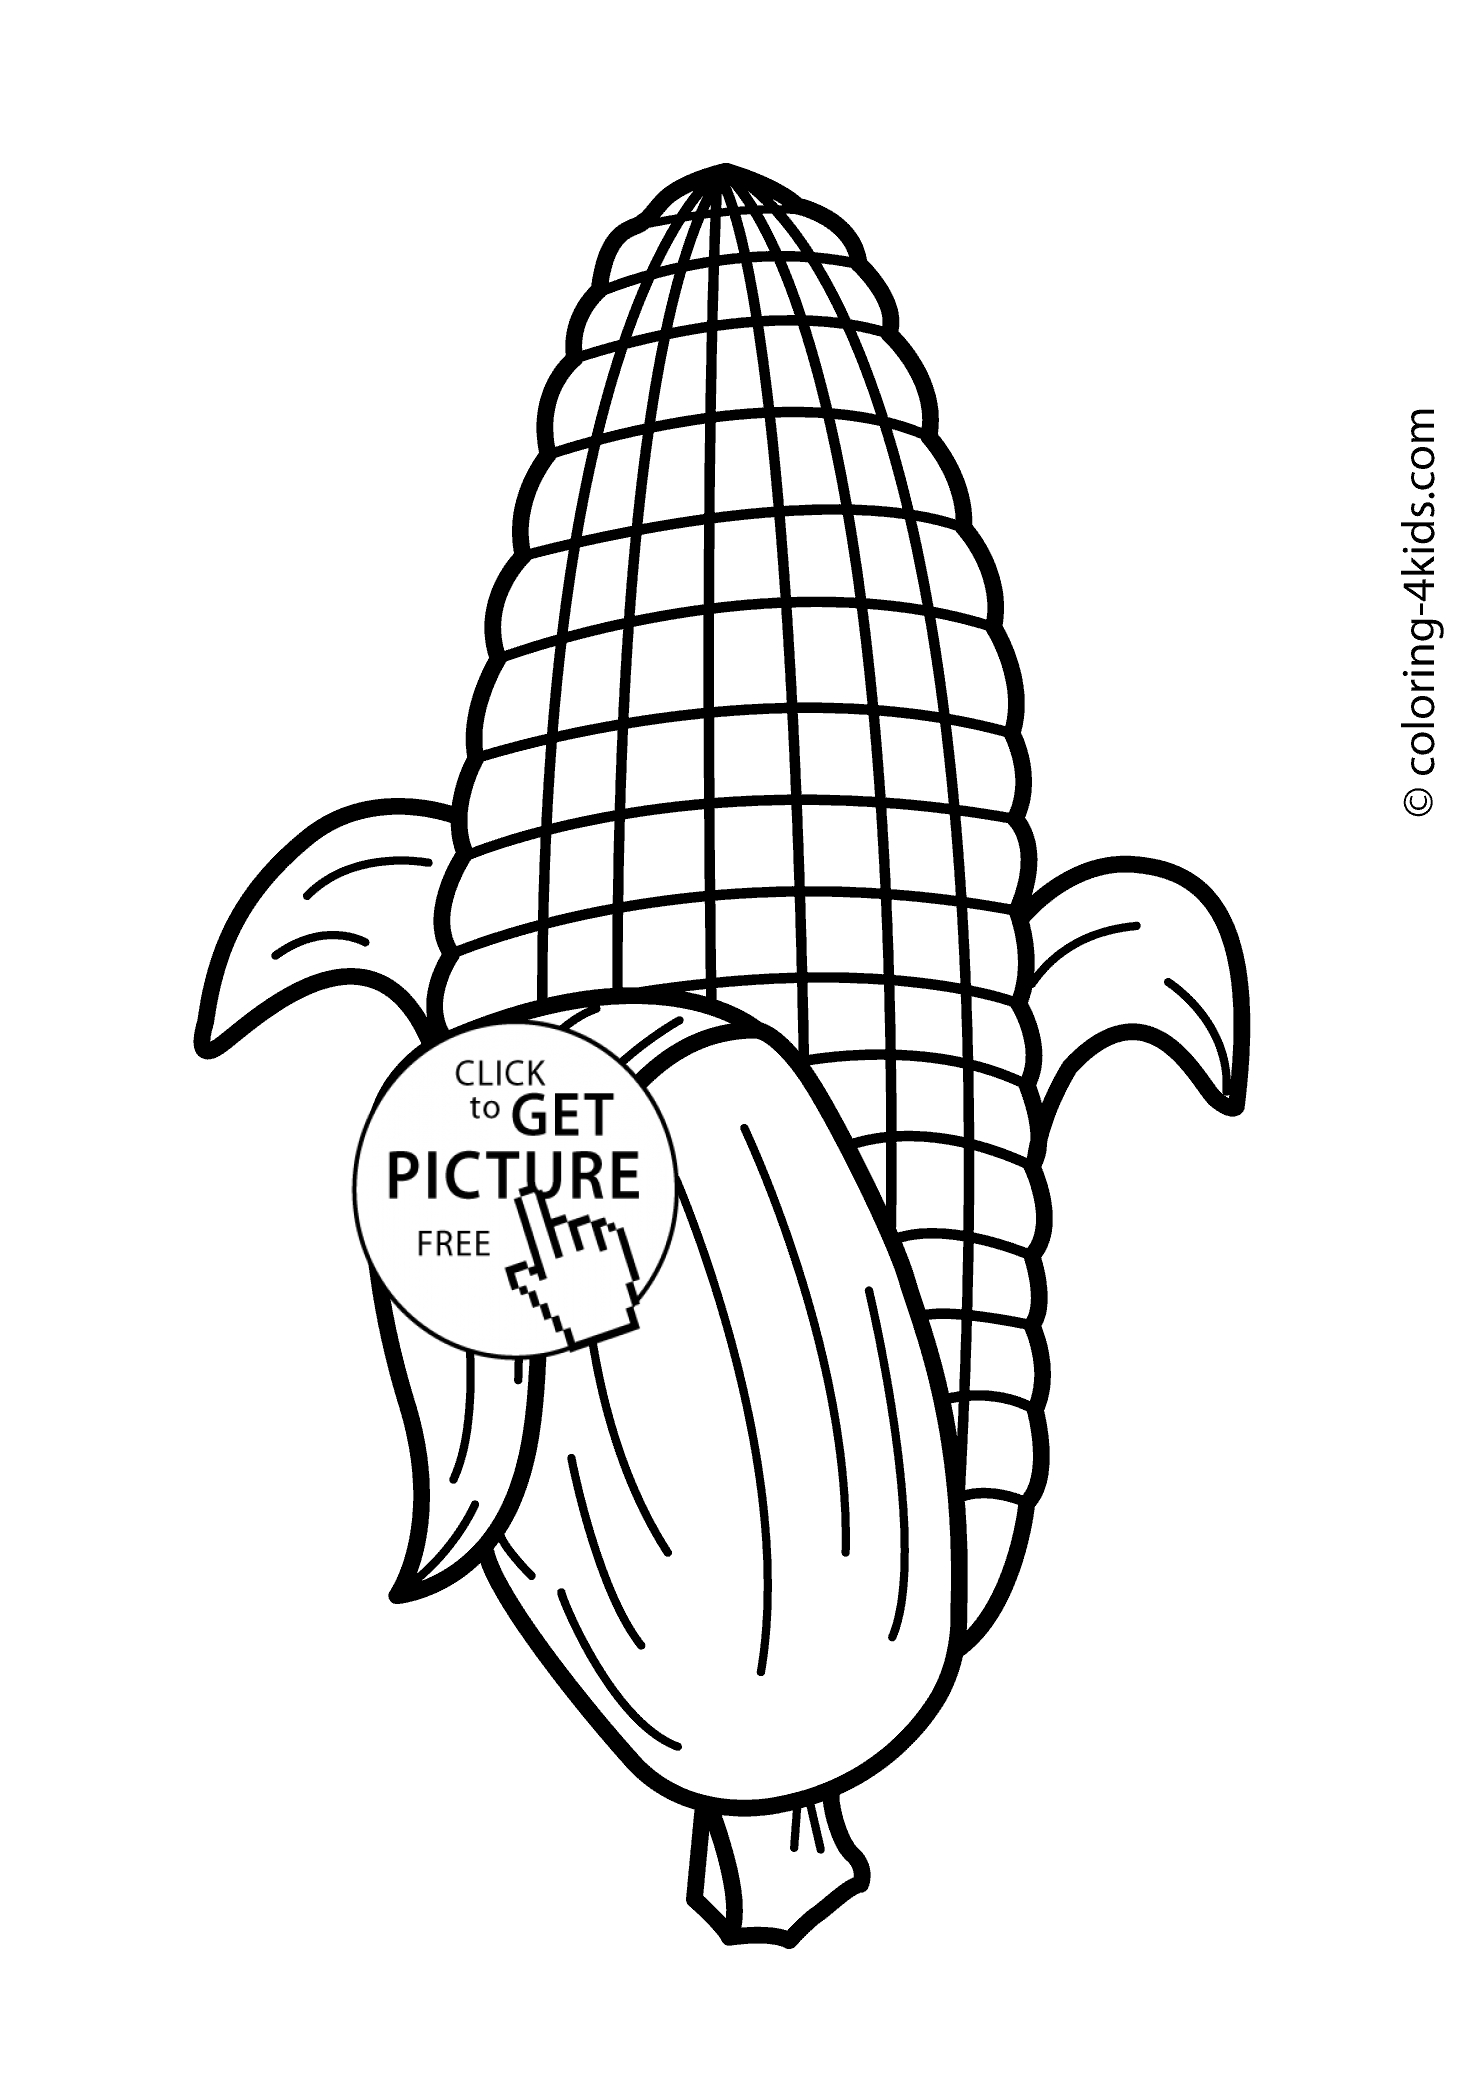 Vegetables Coloring Page Maize Vegetable Coloring Page For Kids Printable